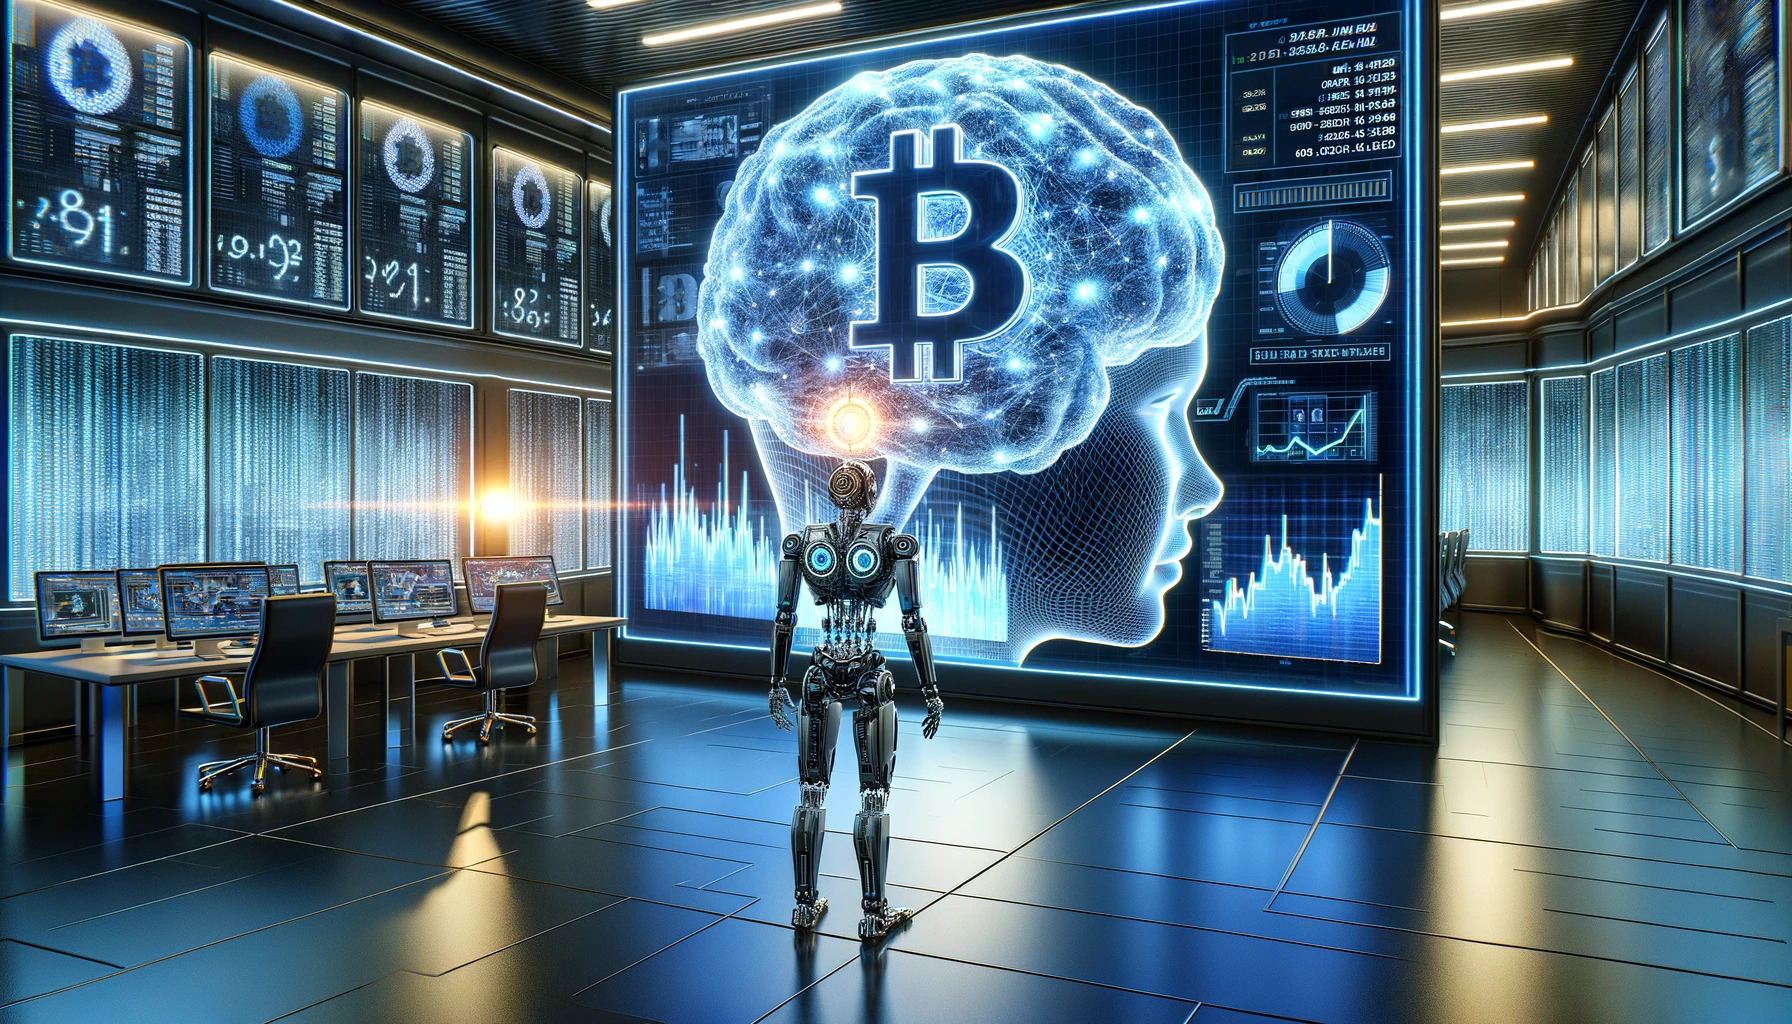 How To Use Artificial Intelligence To Analyze The Bitcoin Market?